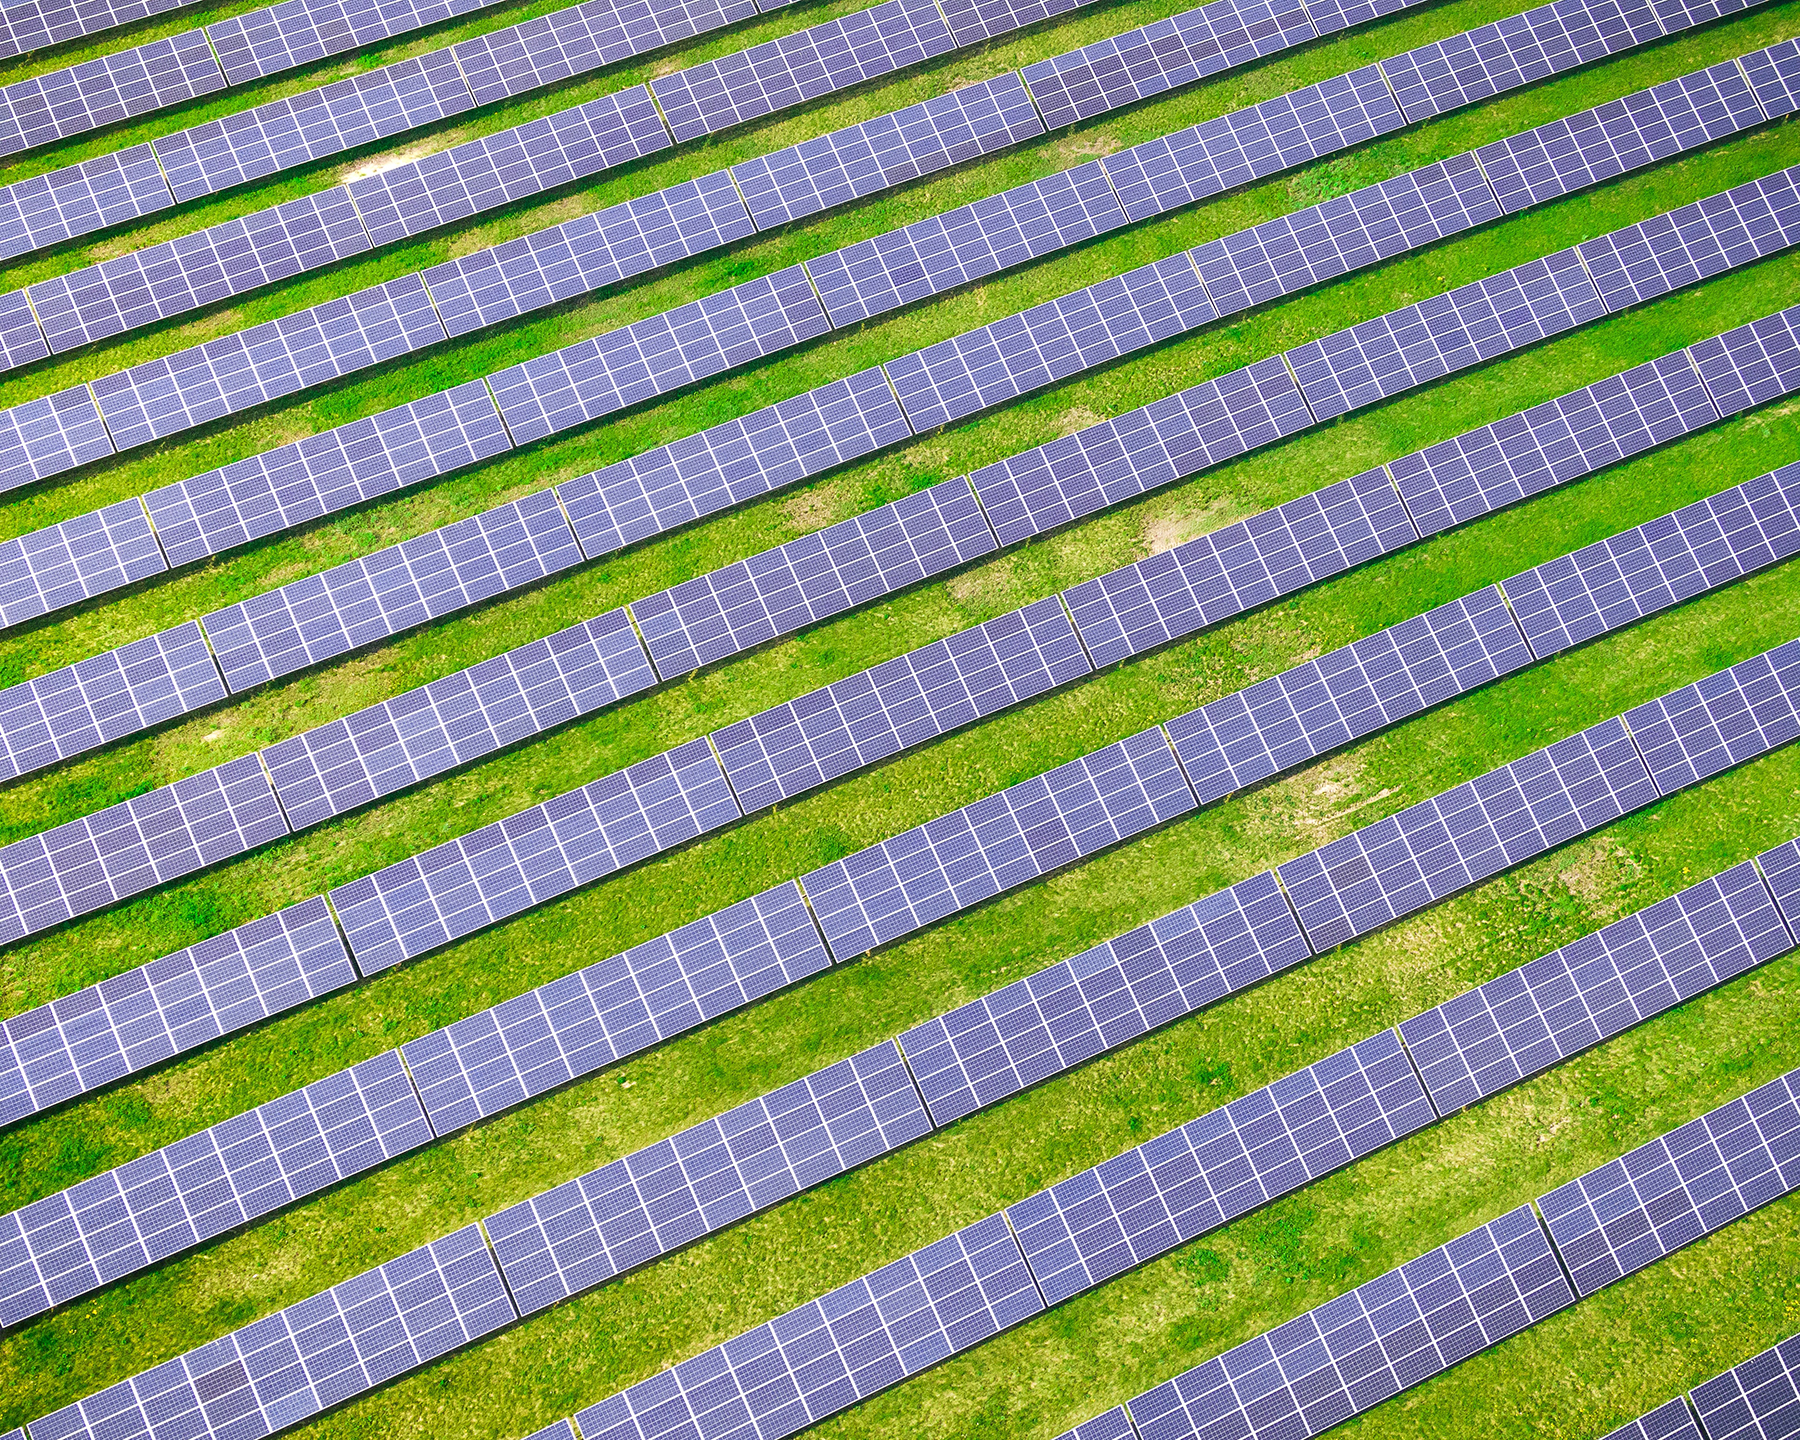 One of the first Superfund sites is becoming a solar park